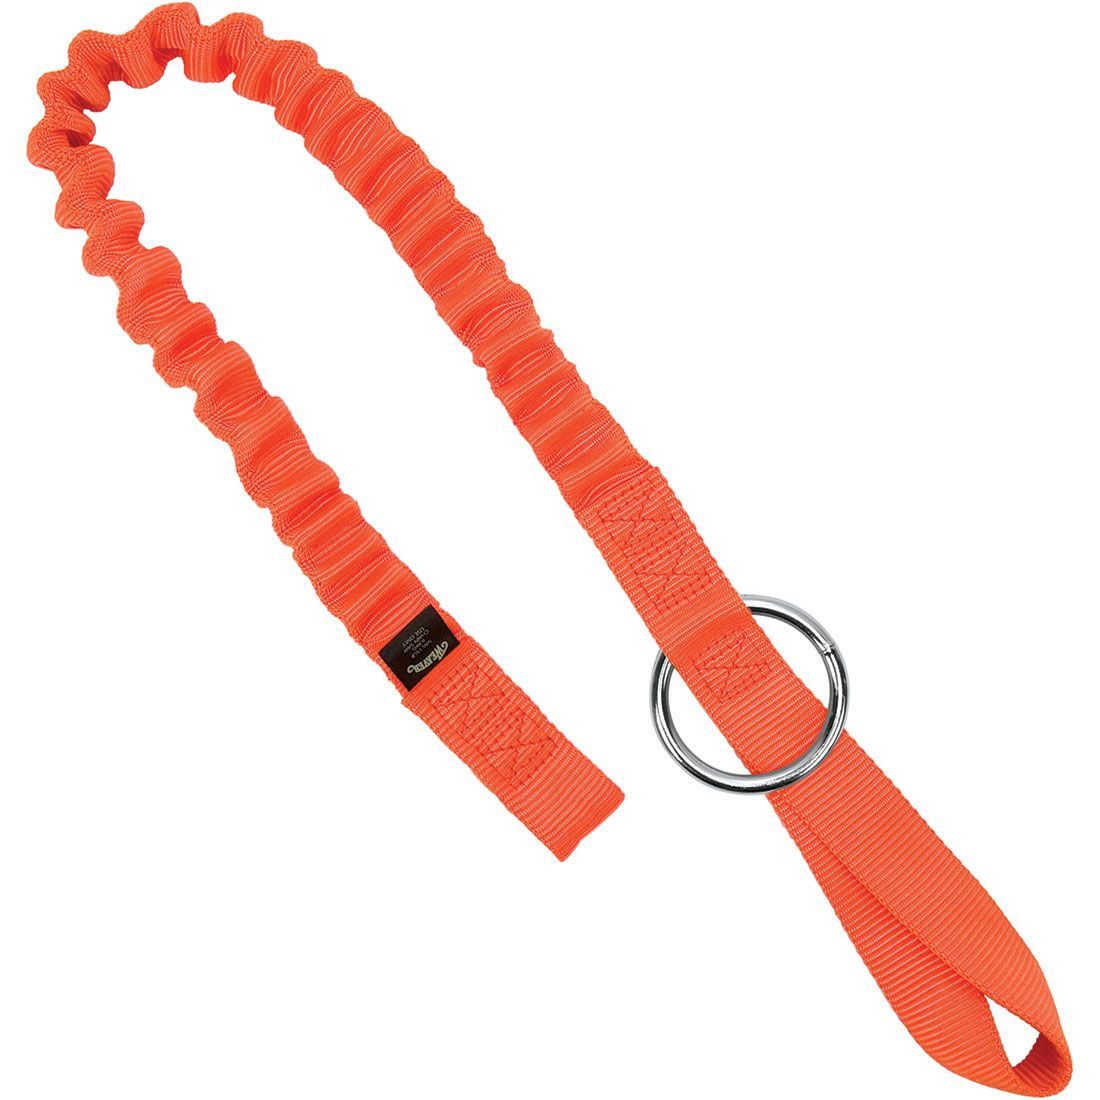 Buy Weaver Coil Bungee Chainsaw Lanyard by Weaver, Quality Gear For  Arborist